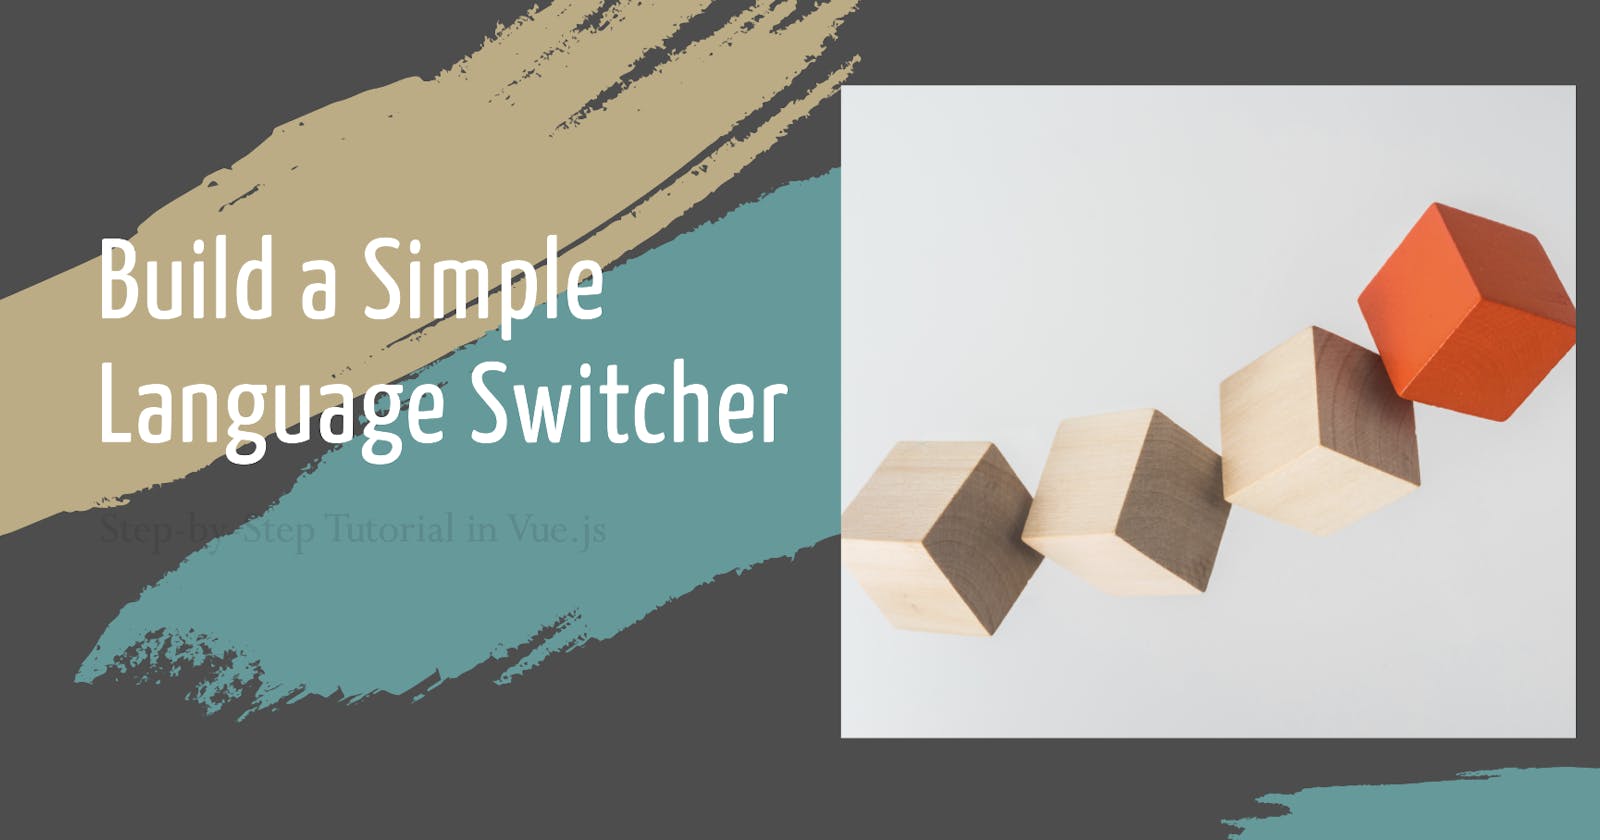 Building a simple language switcher in a vue.js: Step-by-step tutorial 🌐